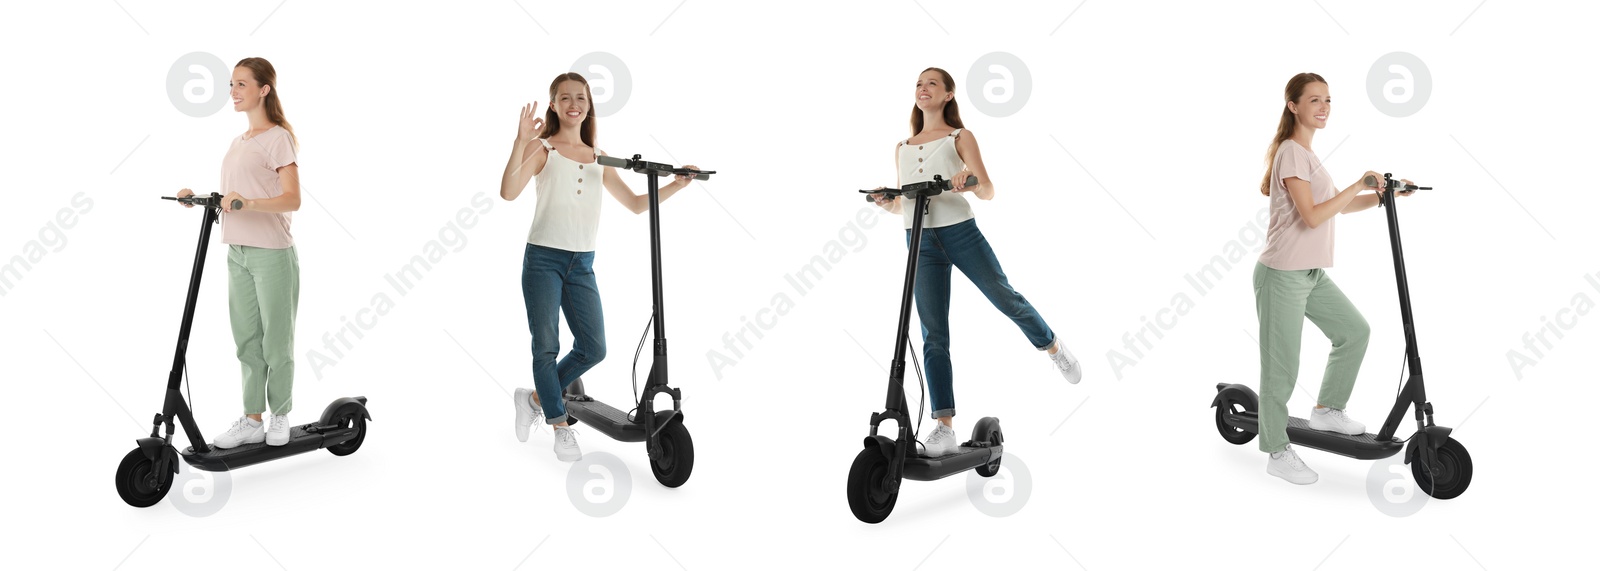 Image of Woman with electric kick scooter isolated on white. Set of photos